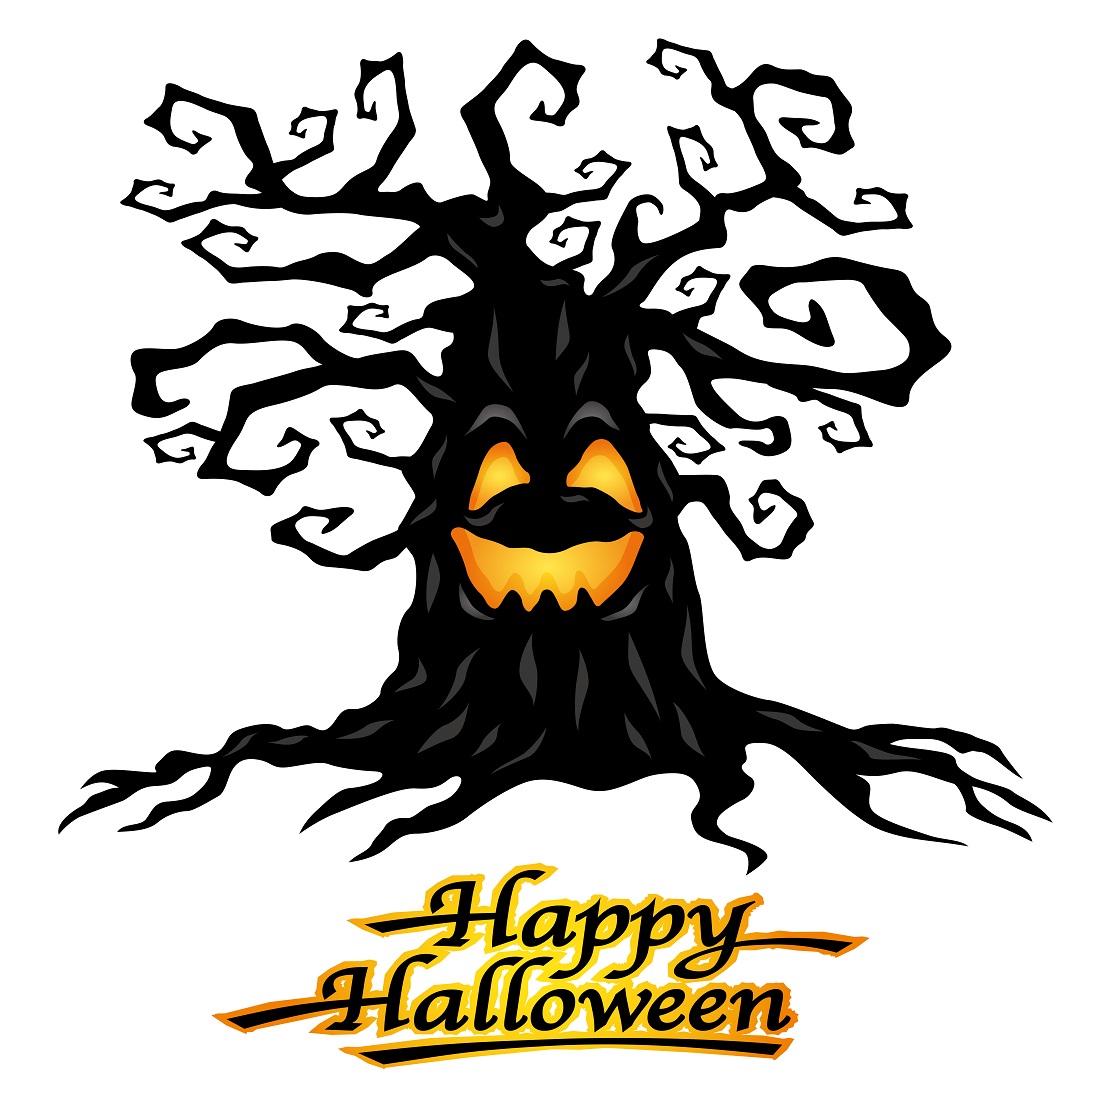 Halloween vector haunted tree illustration isolated cover image.